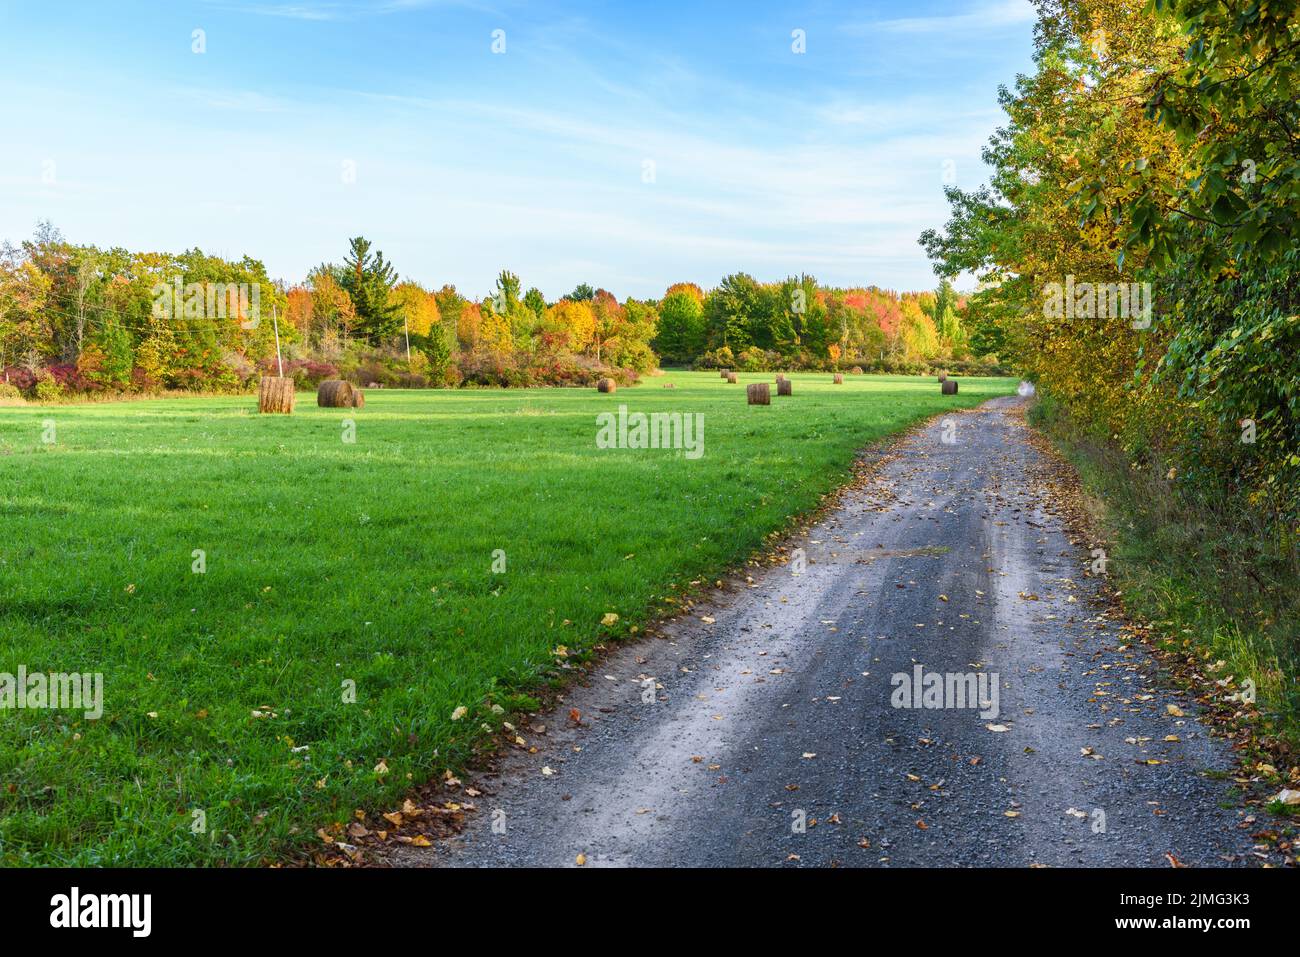 Gravel back road along a grassy field dotted with hay bale surrounded by a deciduous forest at the peak of fall foliage on a sunny day Stock Photo